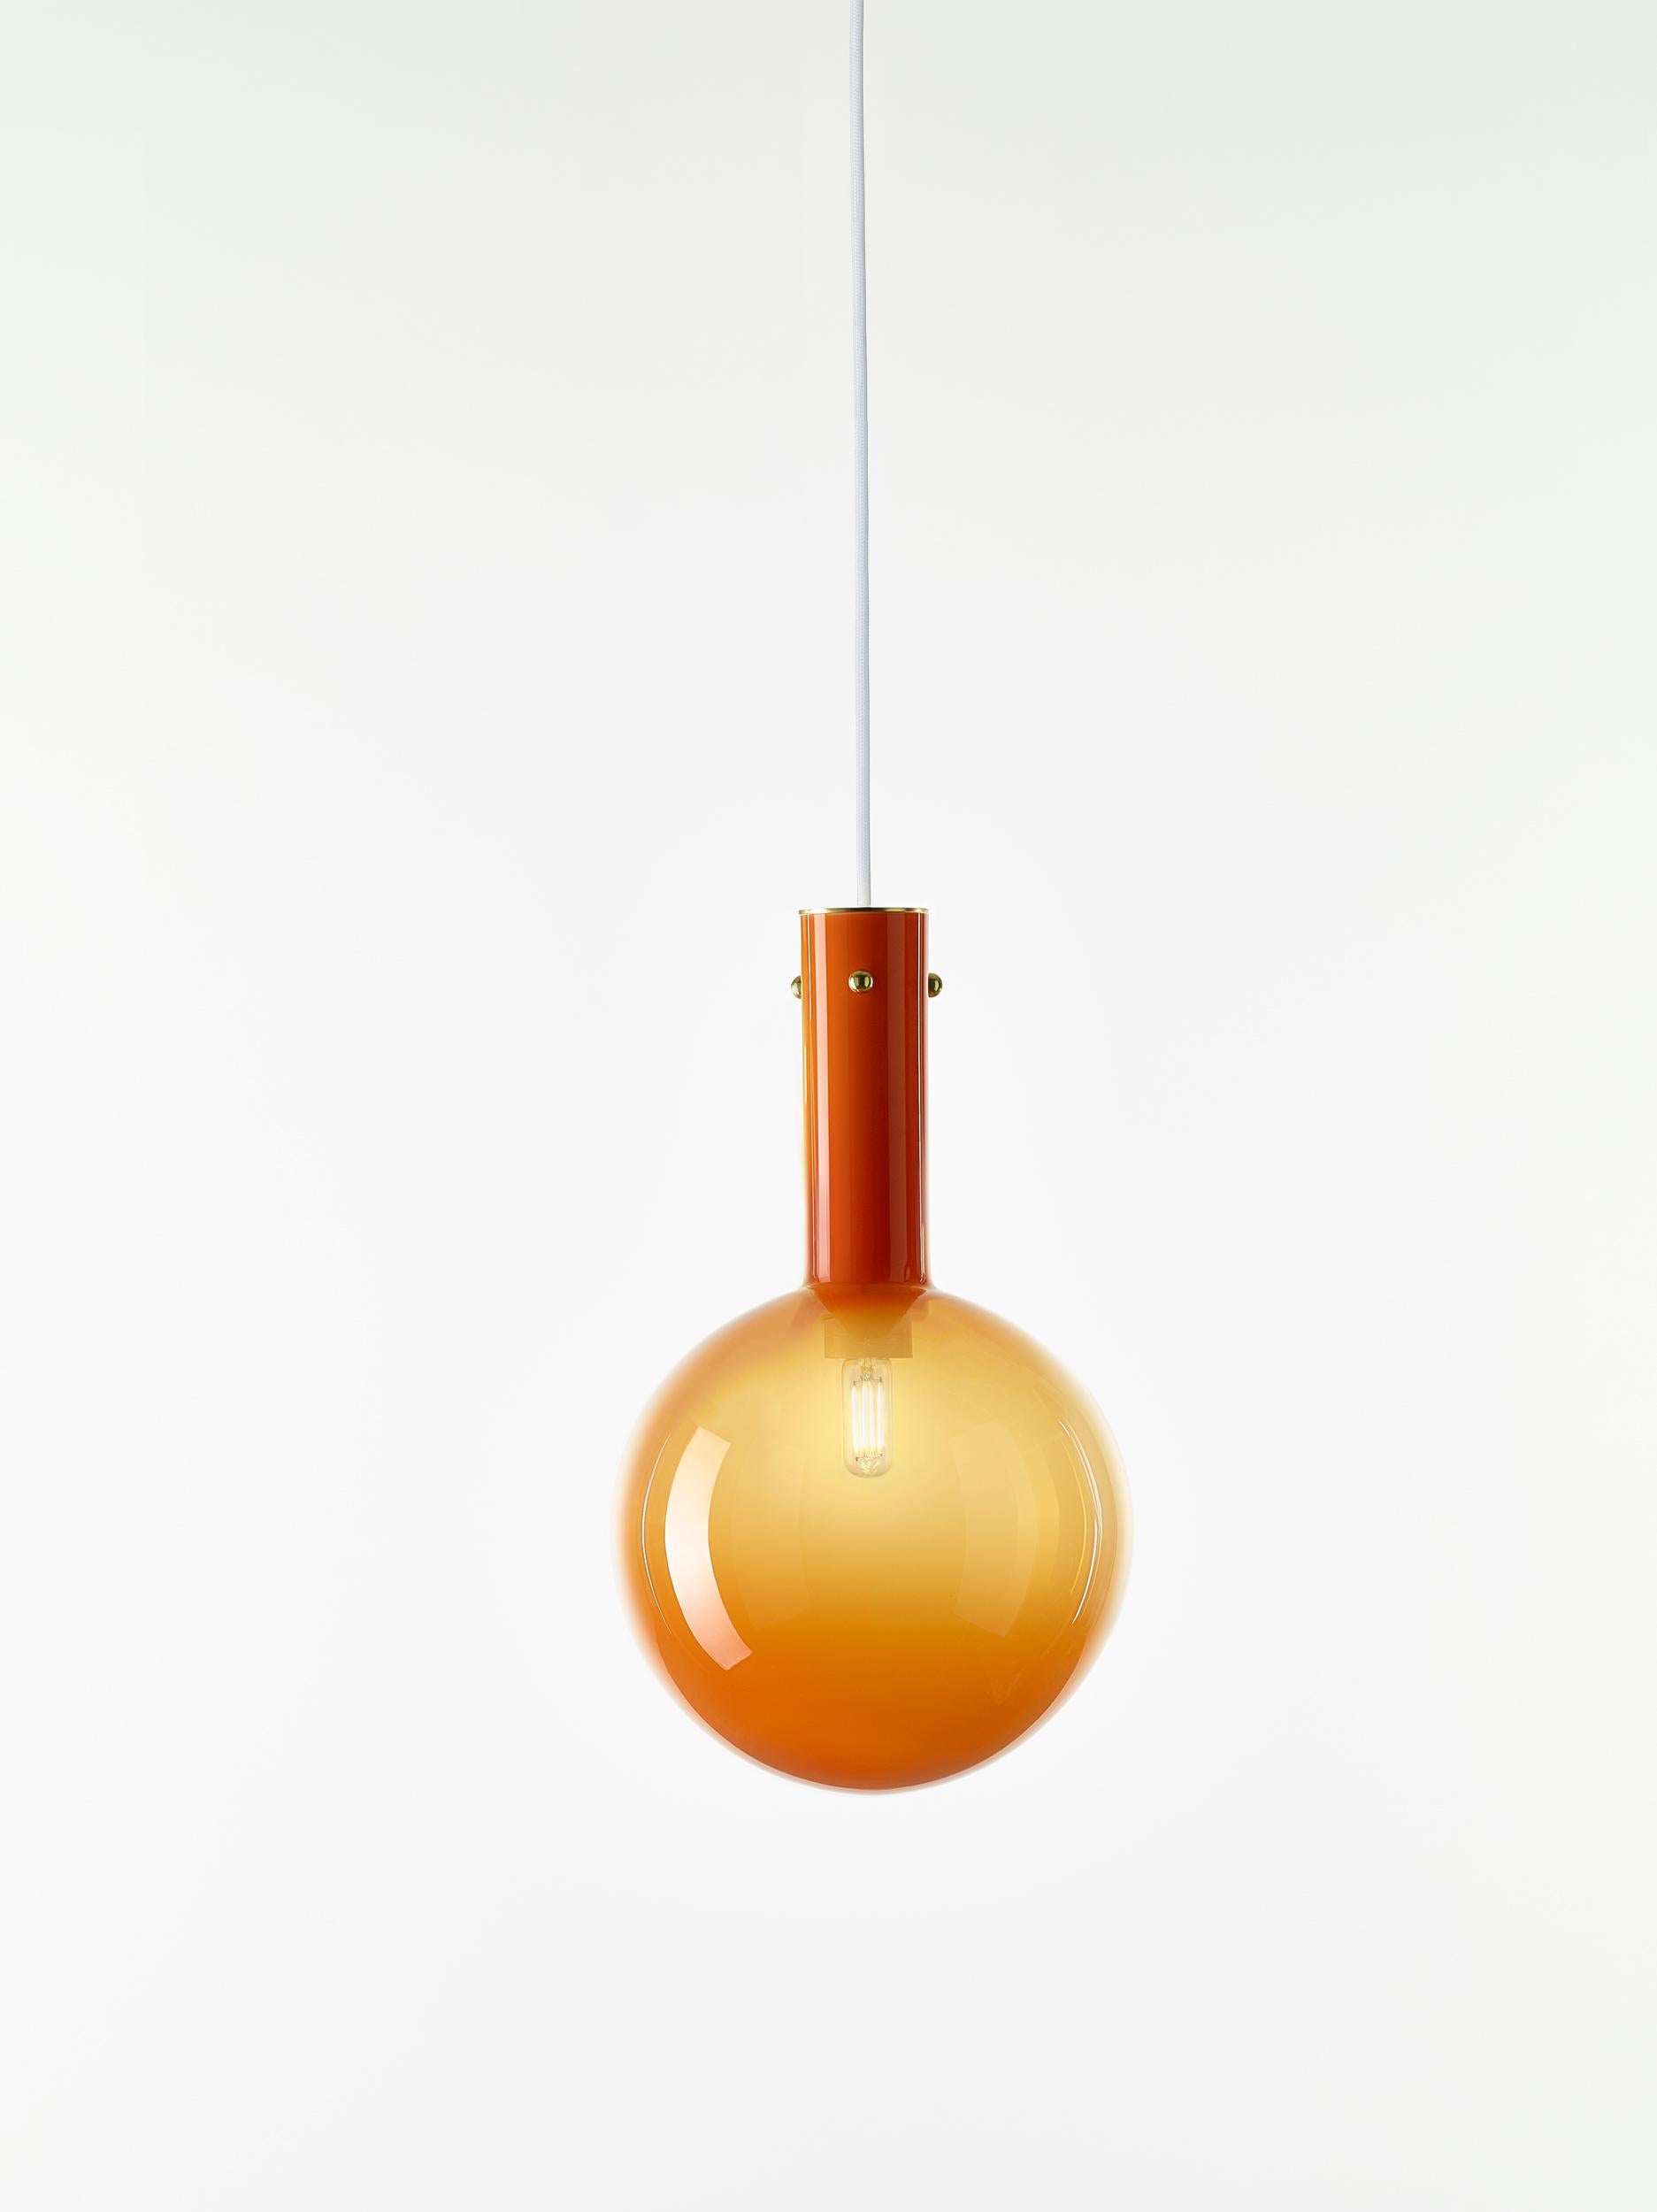 Orange Sphaerae pendant light by Dechem Studio
Dimensions: D 20 x H 180 cm
Materials: Brass, Metal, Glass.
Also Available: Different finishes and colours available.

Only one homogenous piece of hand-blown glass creates the main body of